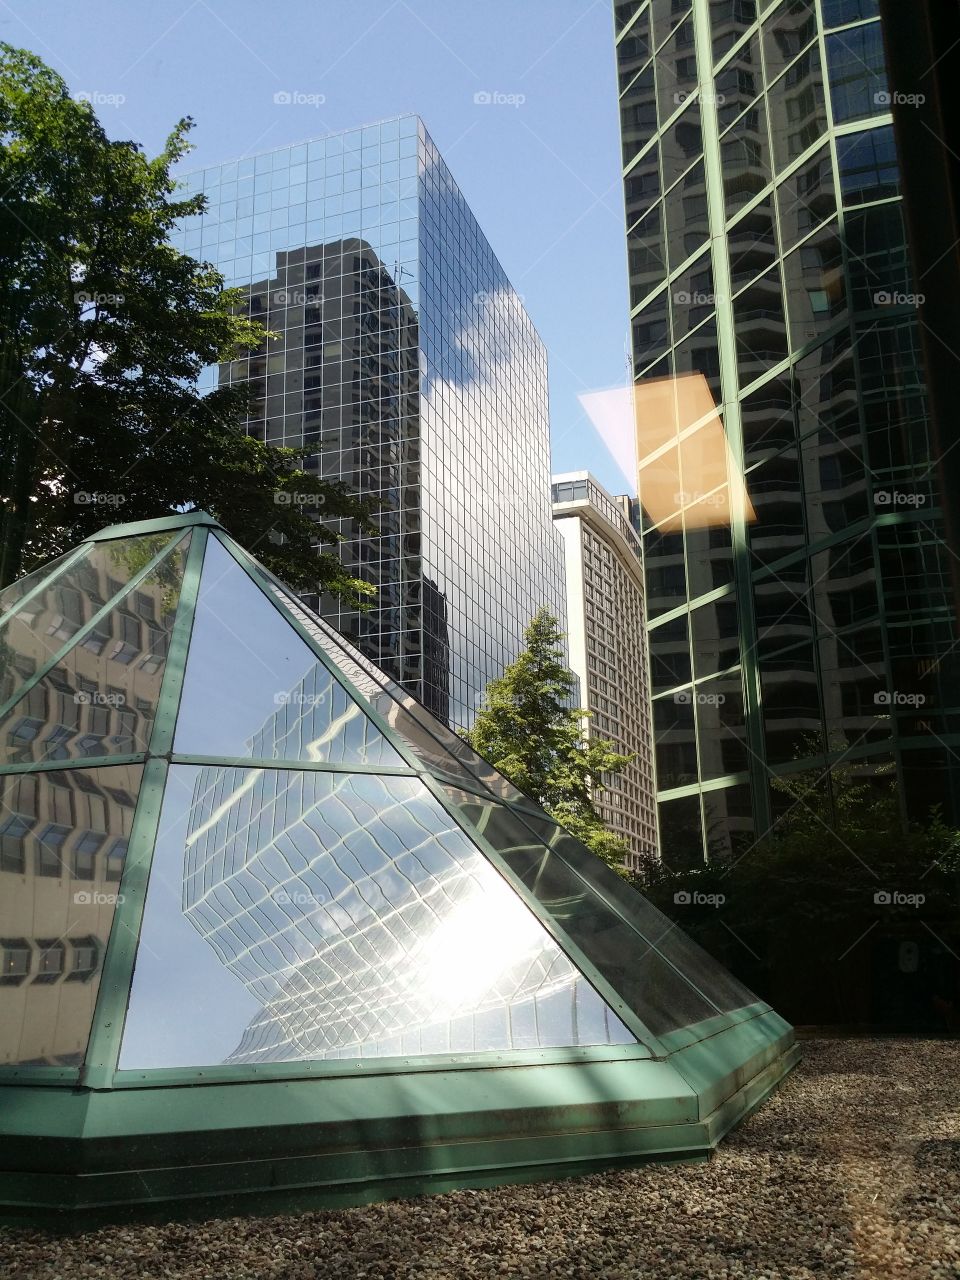 Glass towers and pyramids